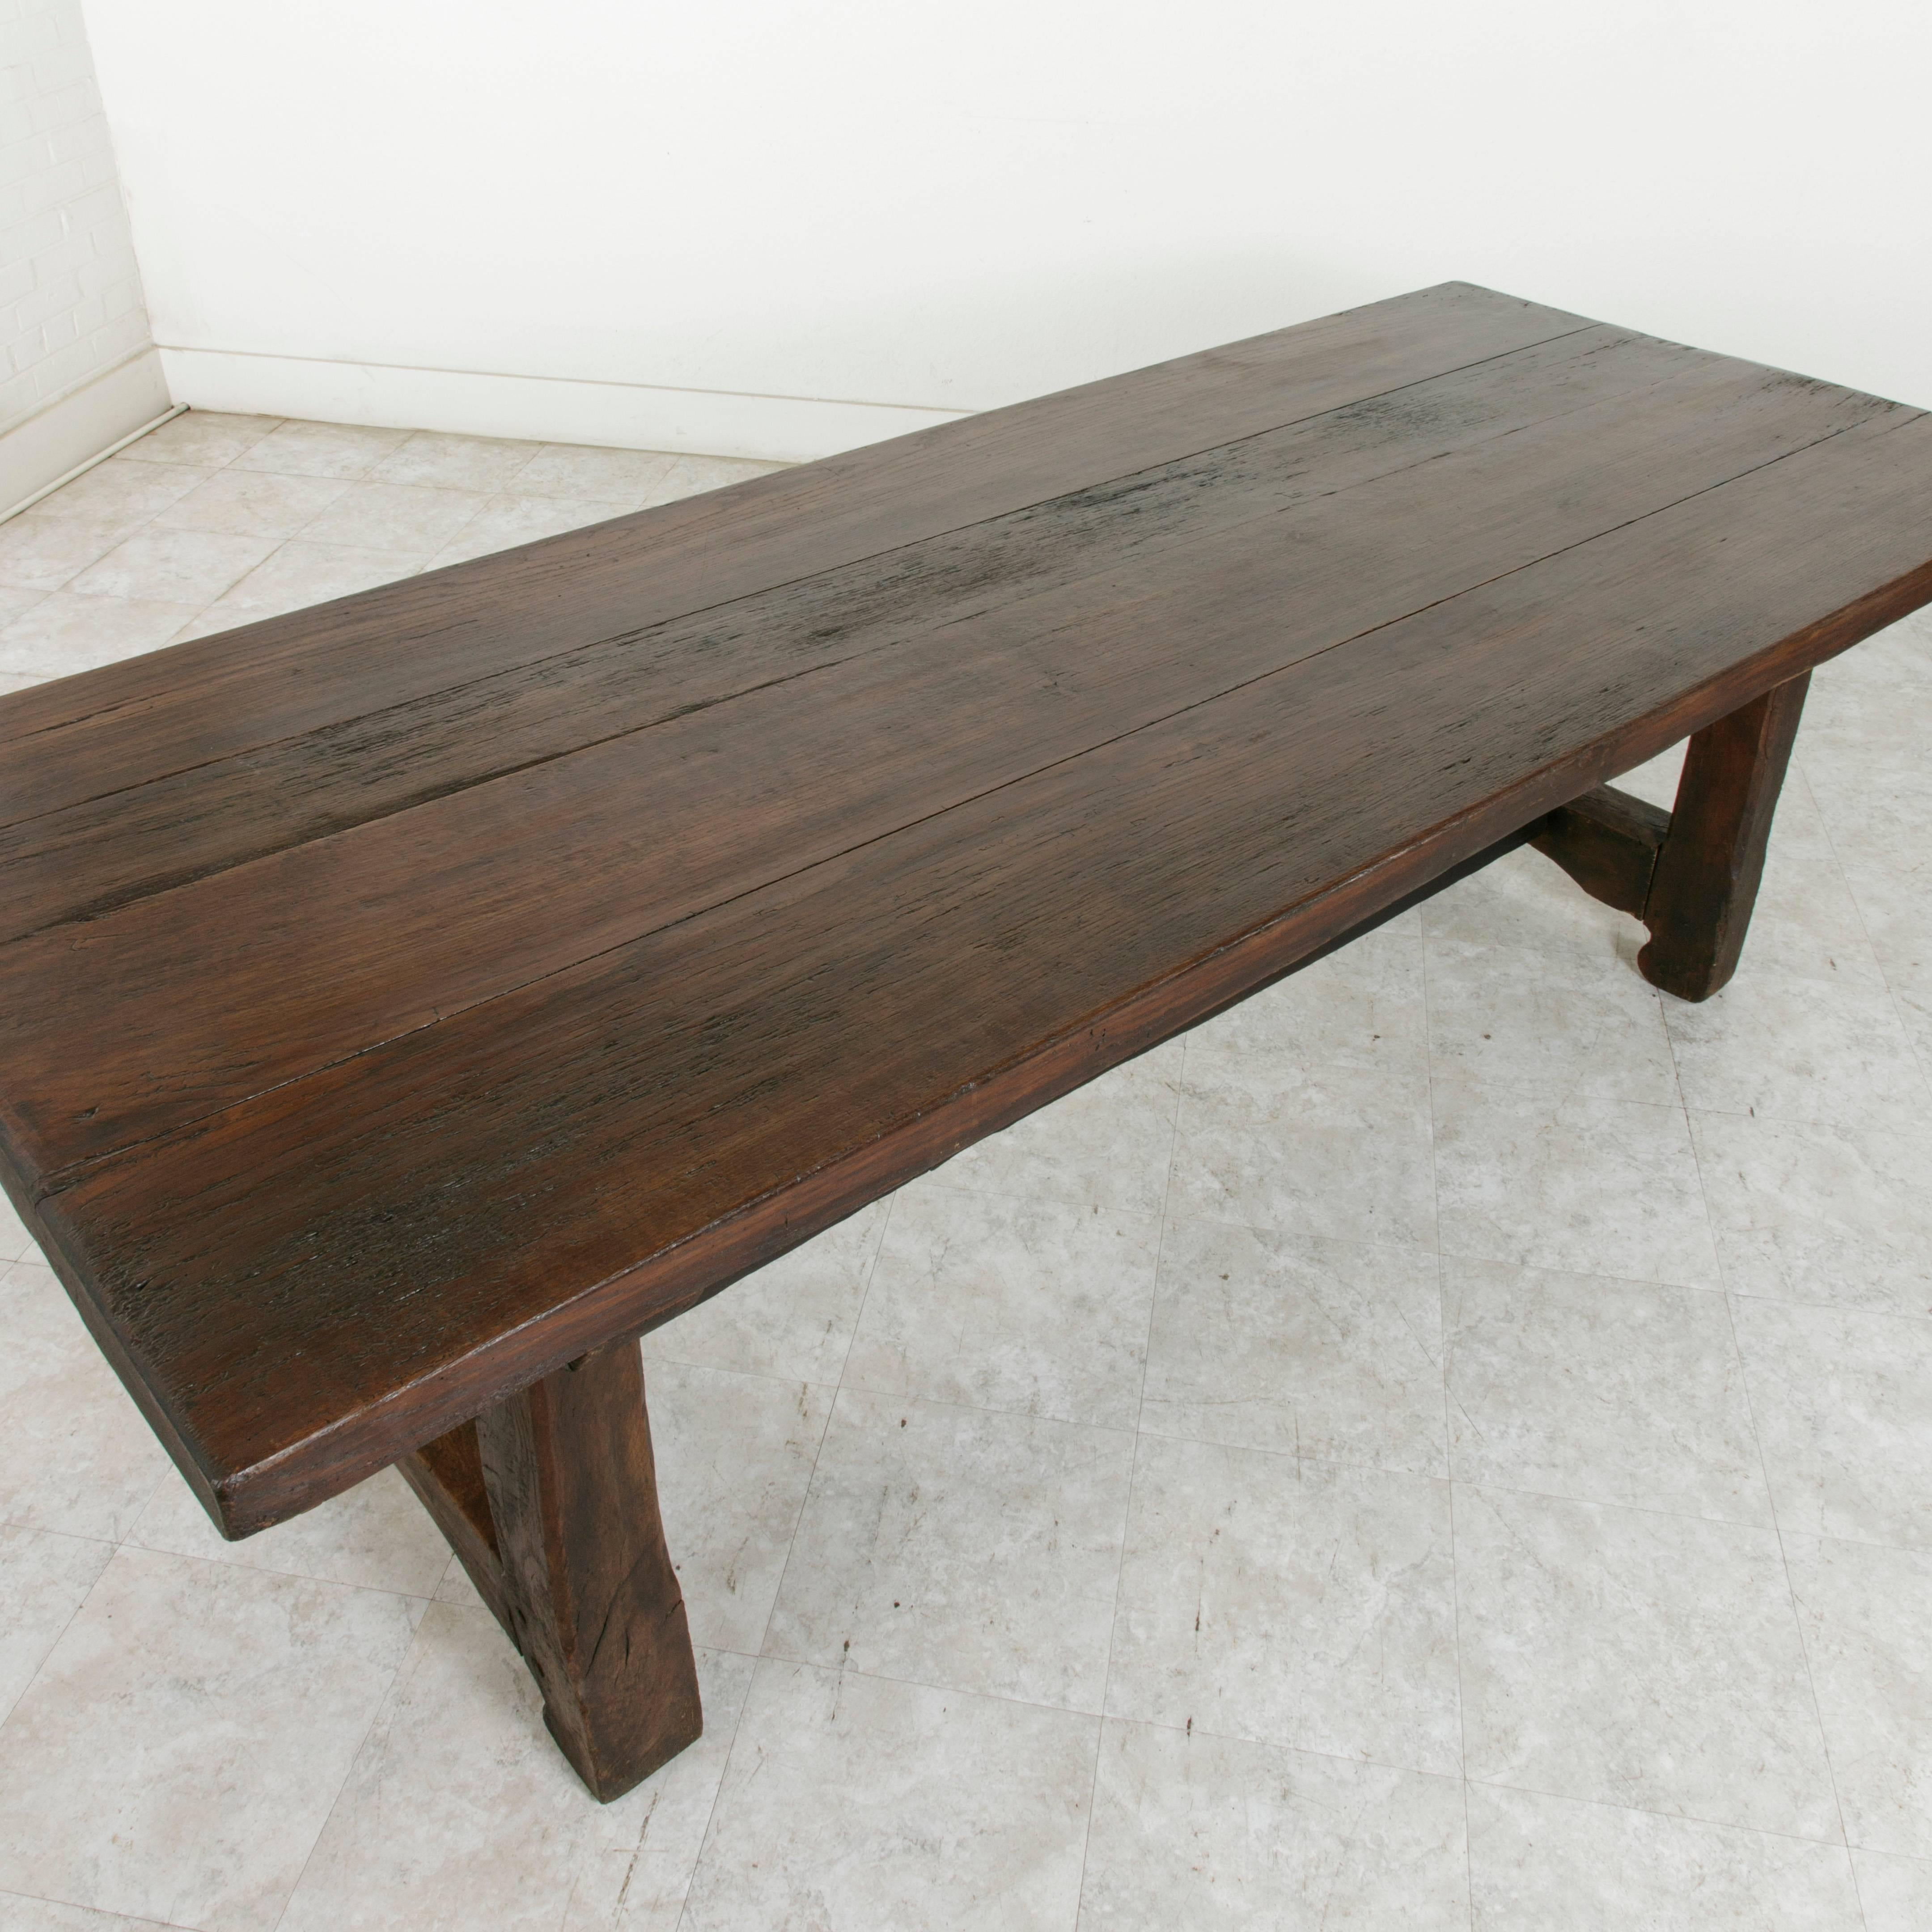 French Artisan-Made Oak Farm Table Dining Table Made from 18th Century Beams 2